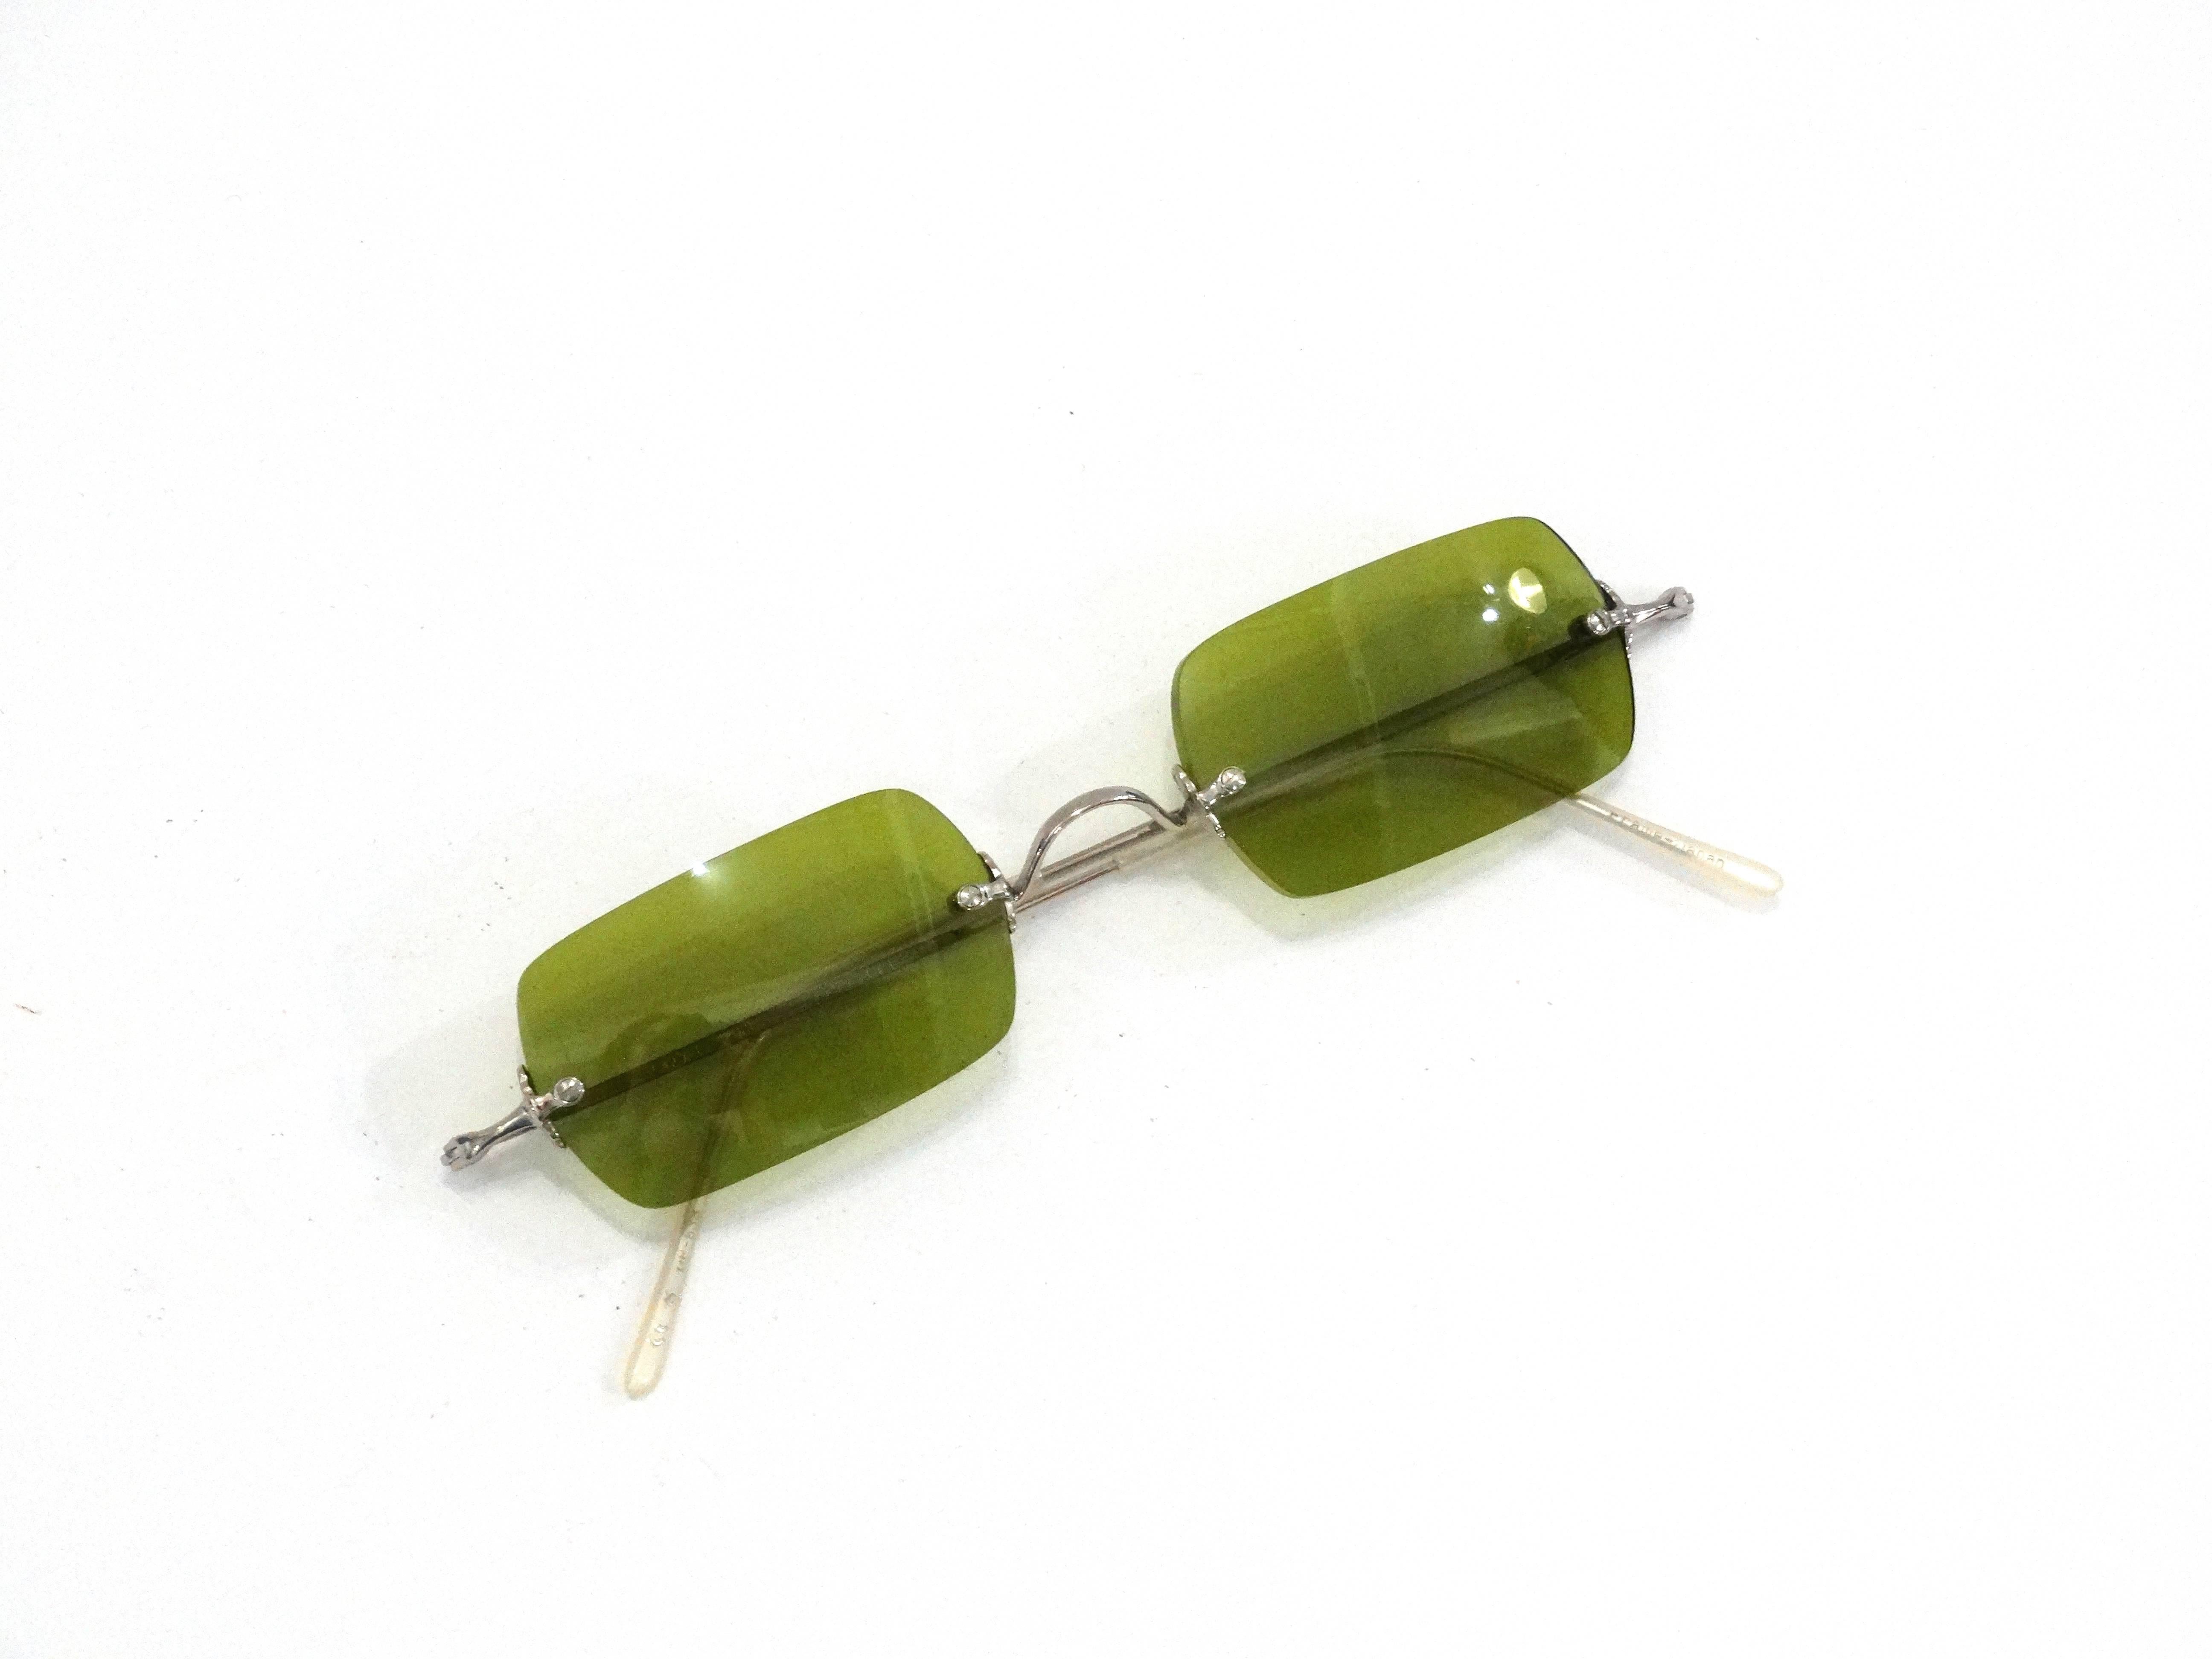 Colored sunglasses are SO en vogue- rock this pair of Oliver Peoples' sunglasses in a rare olive green color! Silver wire hardware. Comes with original leather case. 

Lens Height: About 1 inches
Lens Width: About 2 inches 